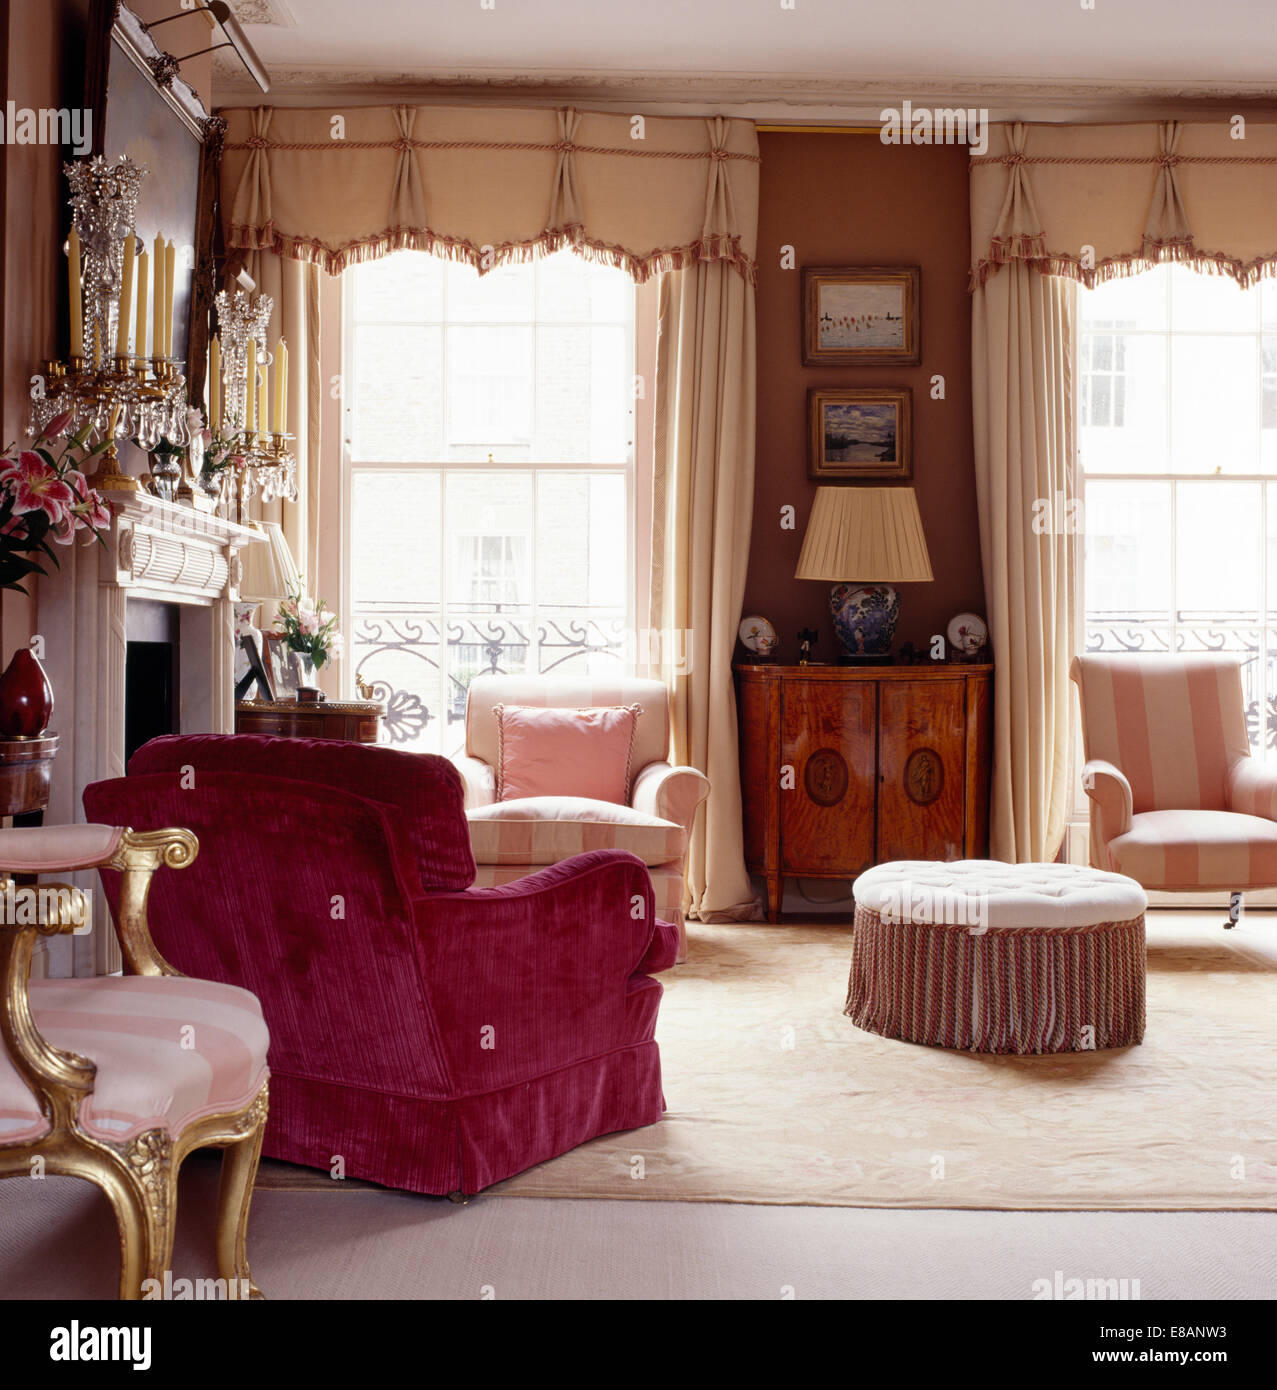 Pink velvet upholstered armchair in elegant townhouse living room with cream drapes and pelmets on windows Stock Photo